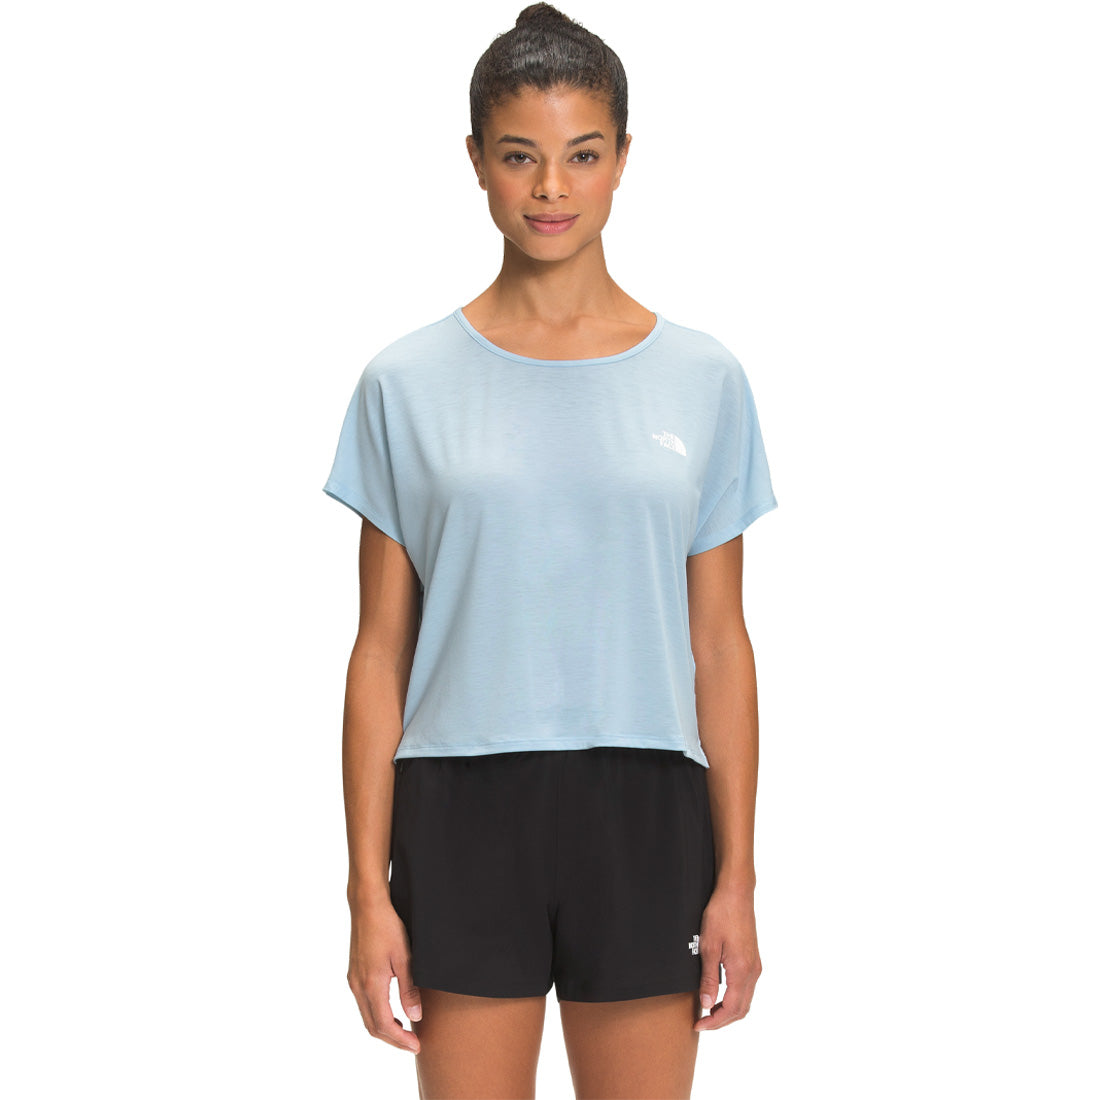 The North Face Crossback Short Sleeve Top - Women's